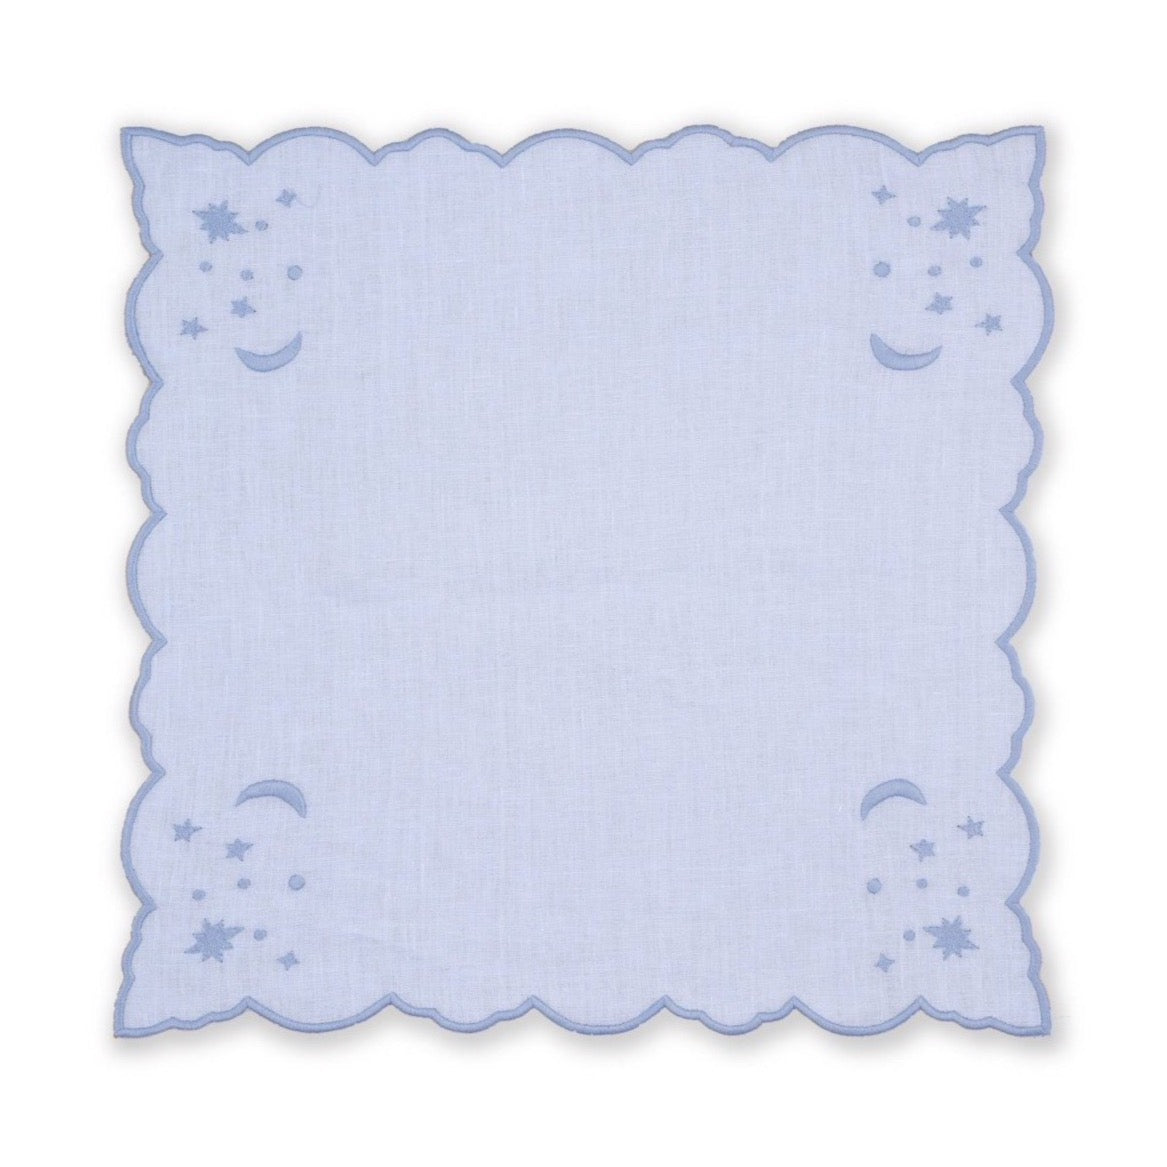 OTM Exclusive: The Astral Linen Napkin in Ice Blue and Ice Blue Embroidery